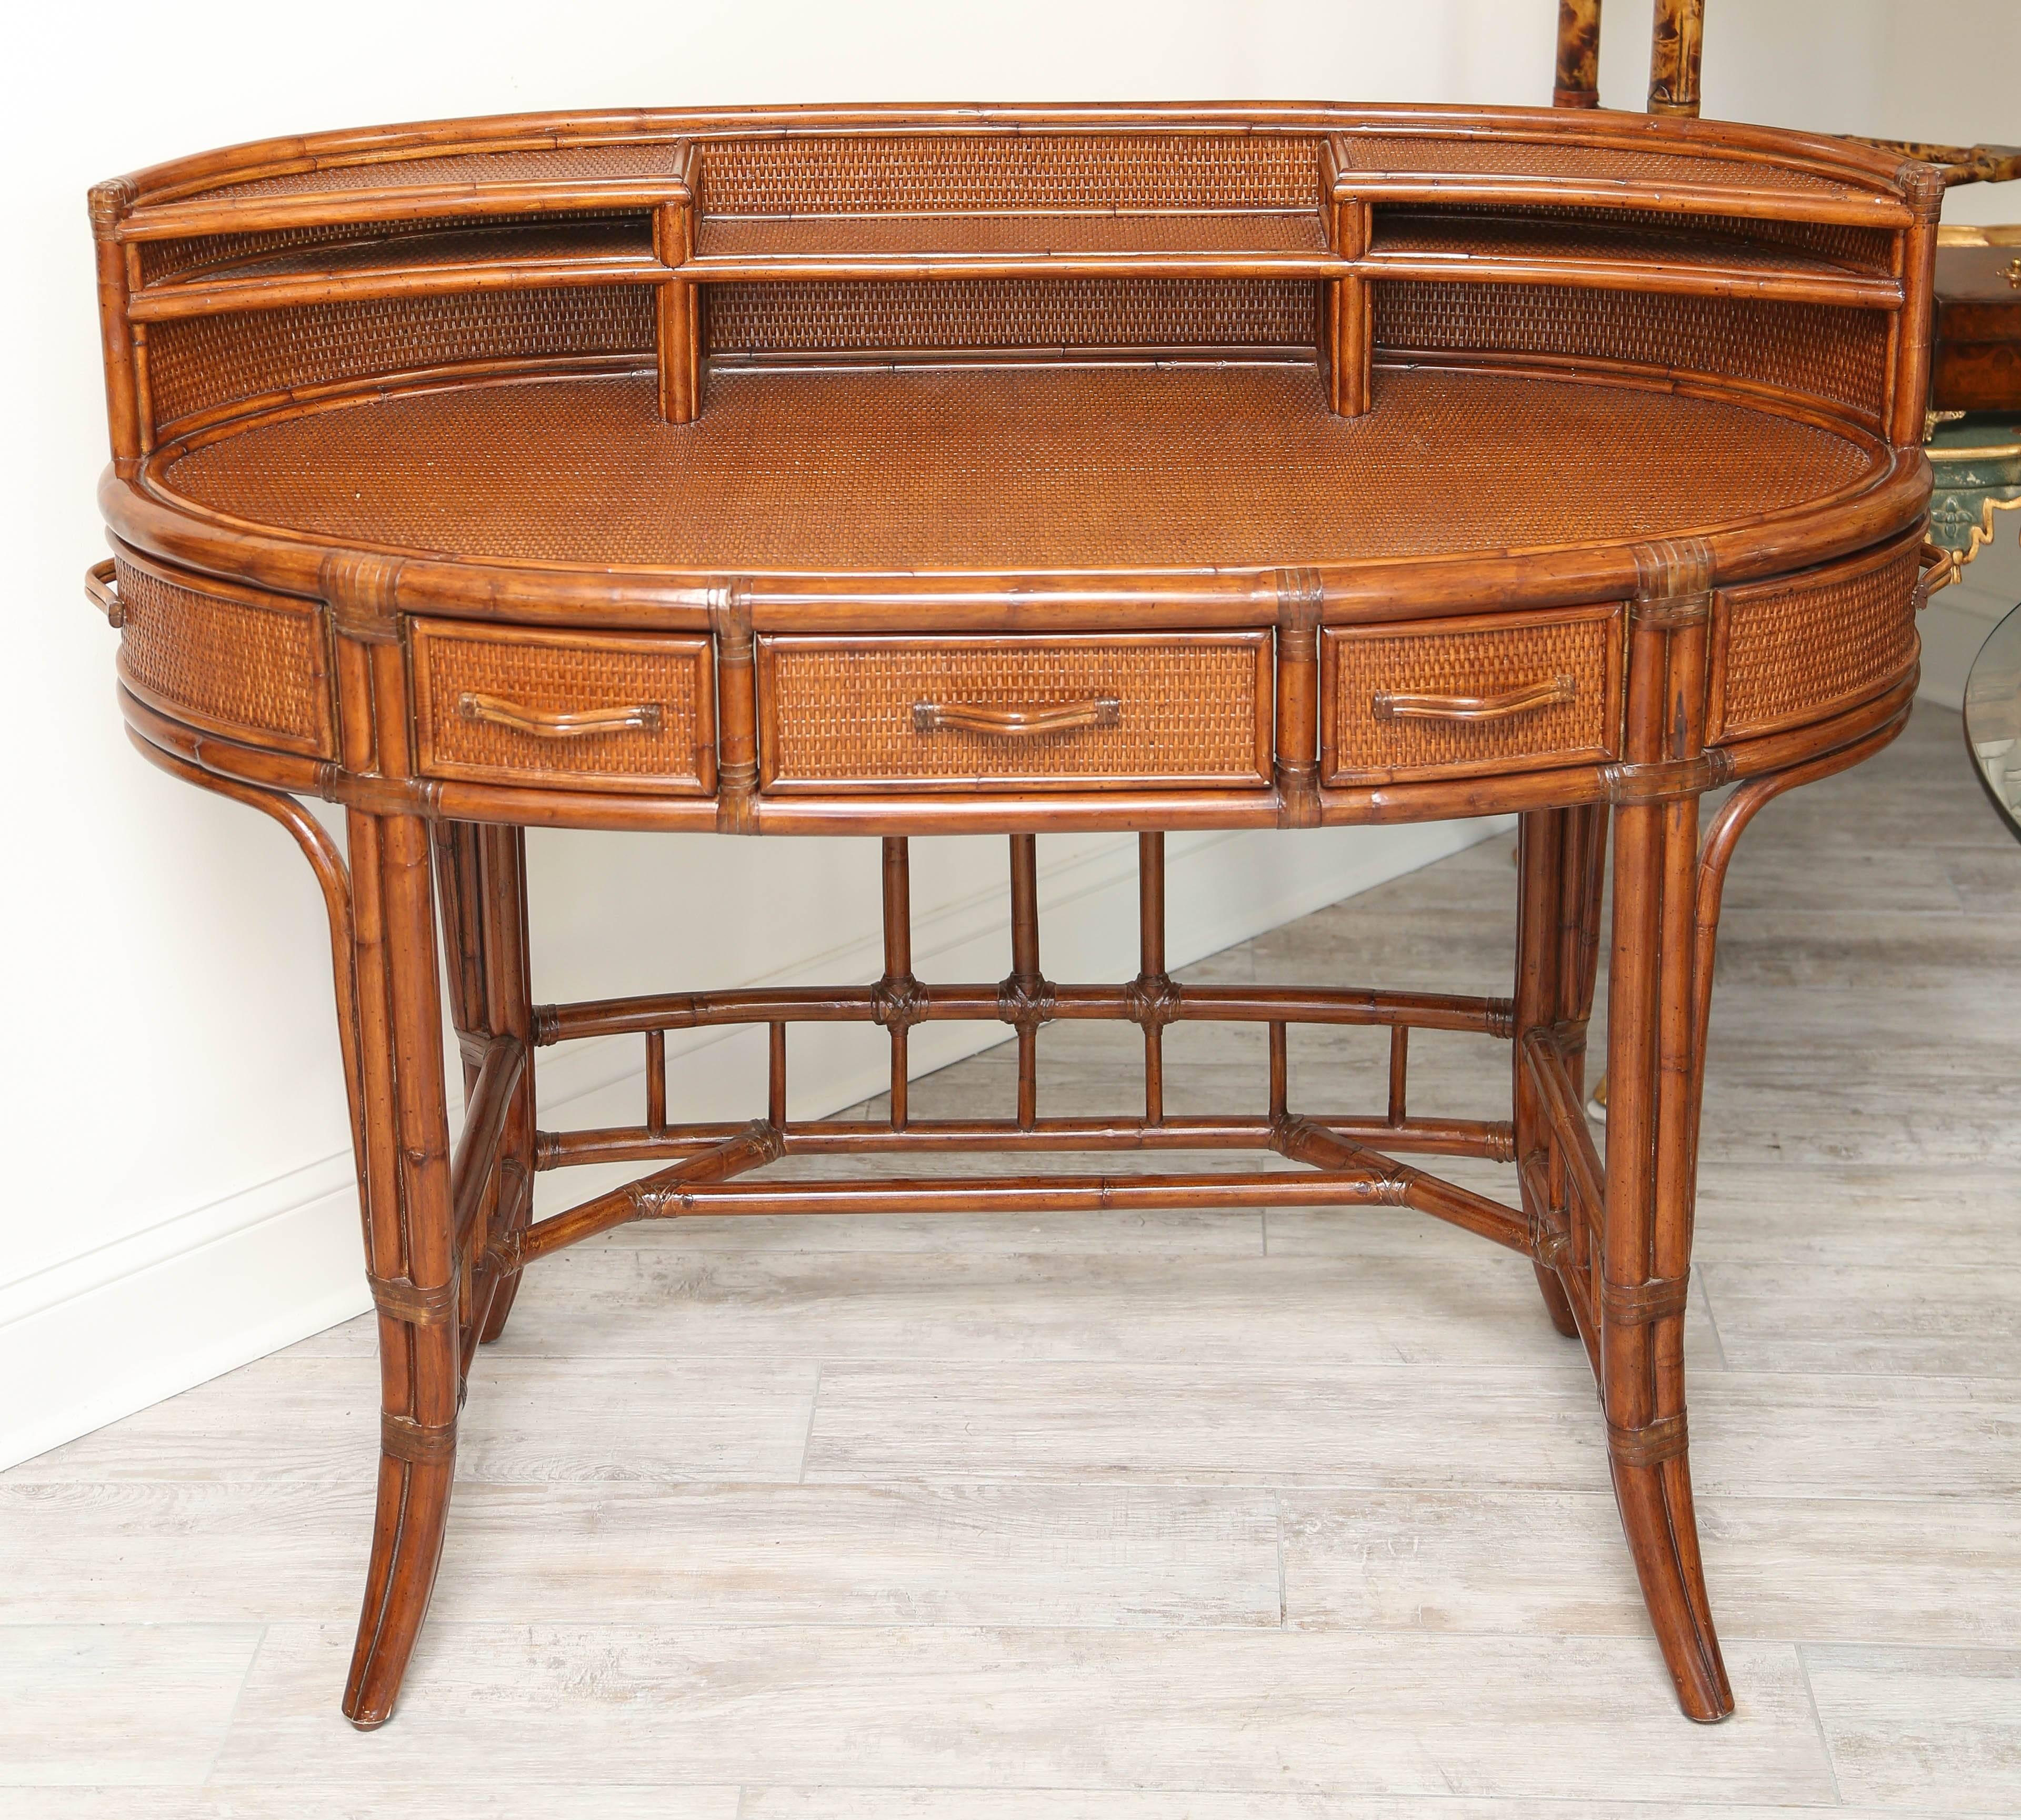 Oval bamboo and rattan desk with multiple drawers and compartments.